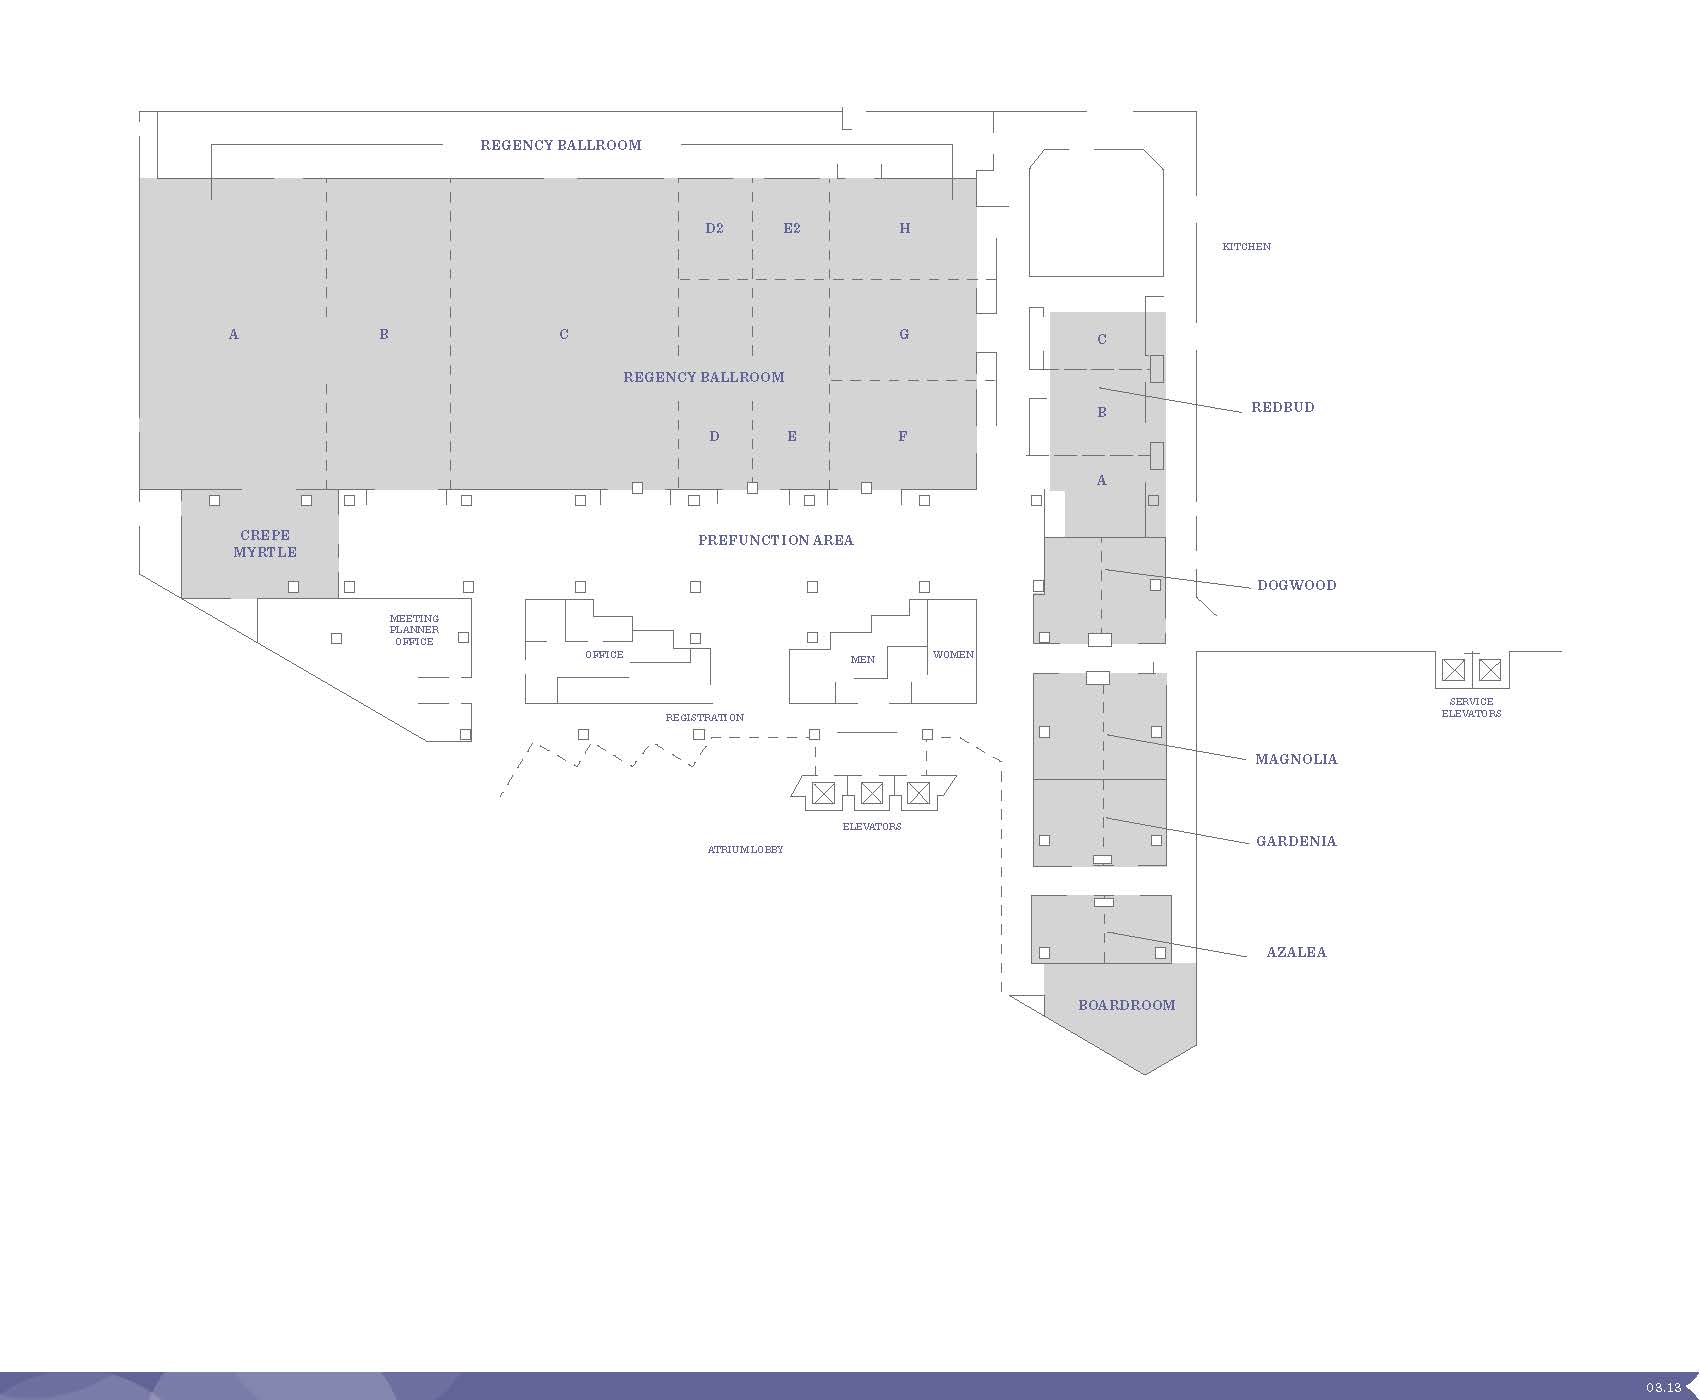 Conference Center Floor Plan - Downstairs